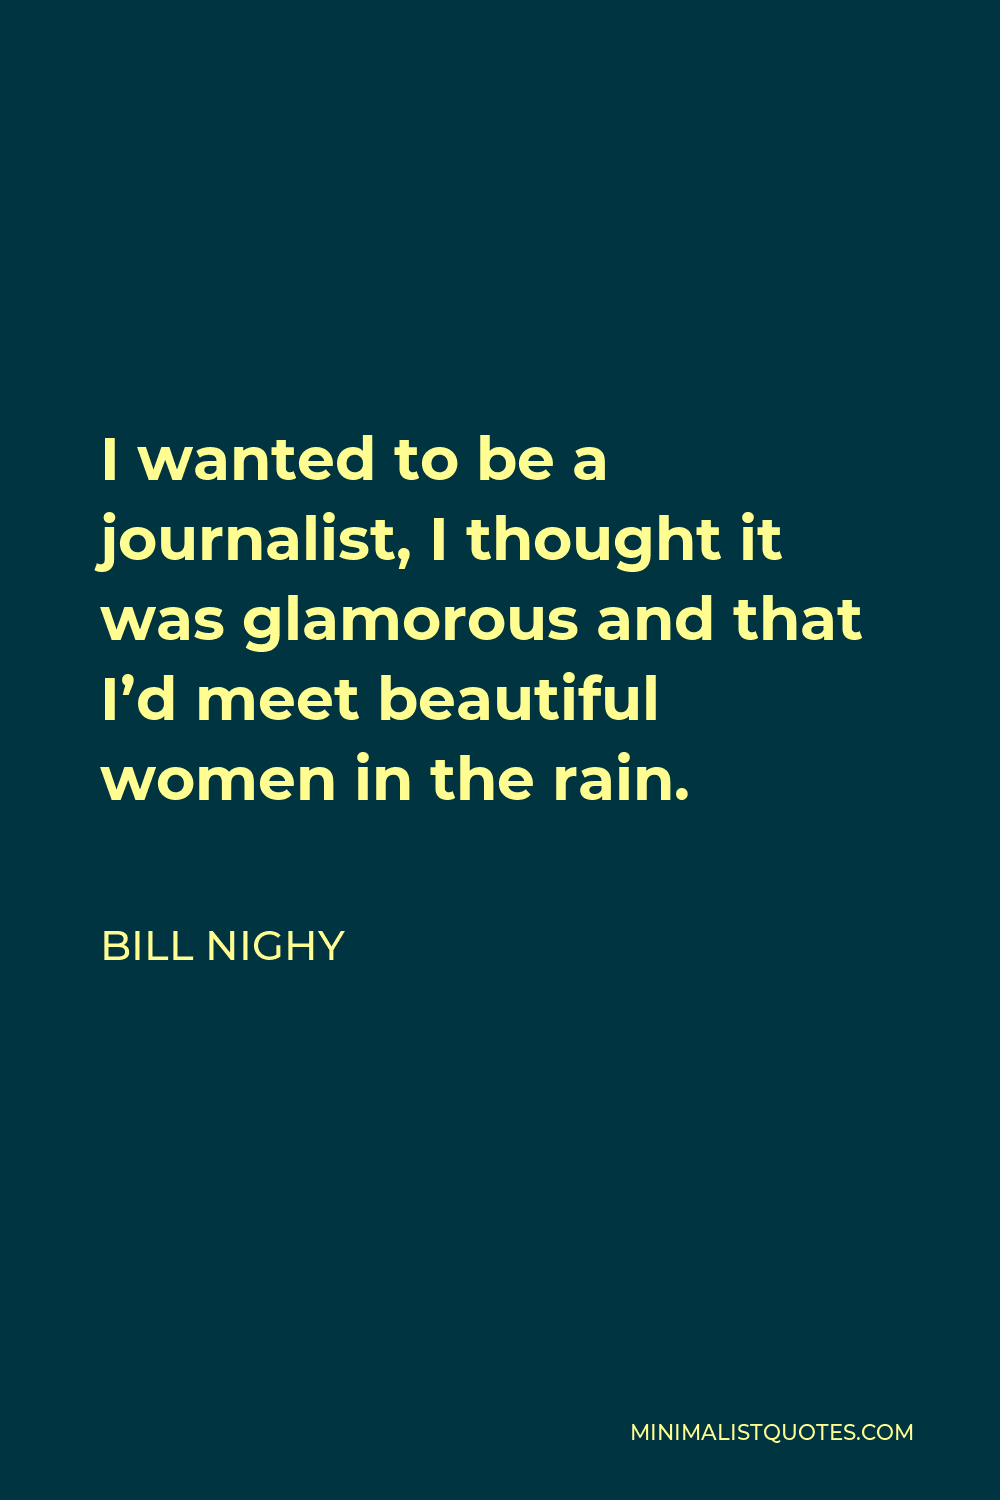 Bill Nighy Quote - I wanted to be a journalist, I thought it was glamorous and that I’d meet beautiful women in the rain.